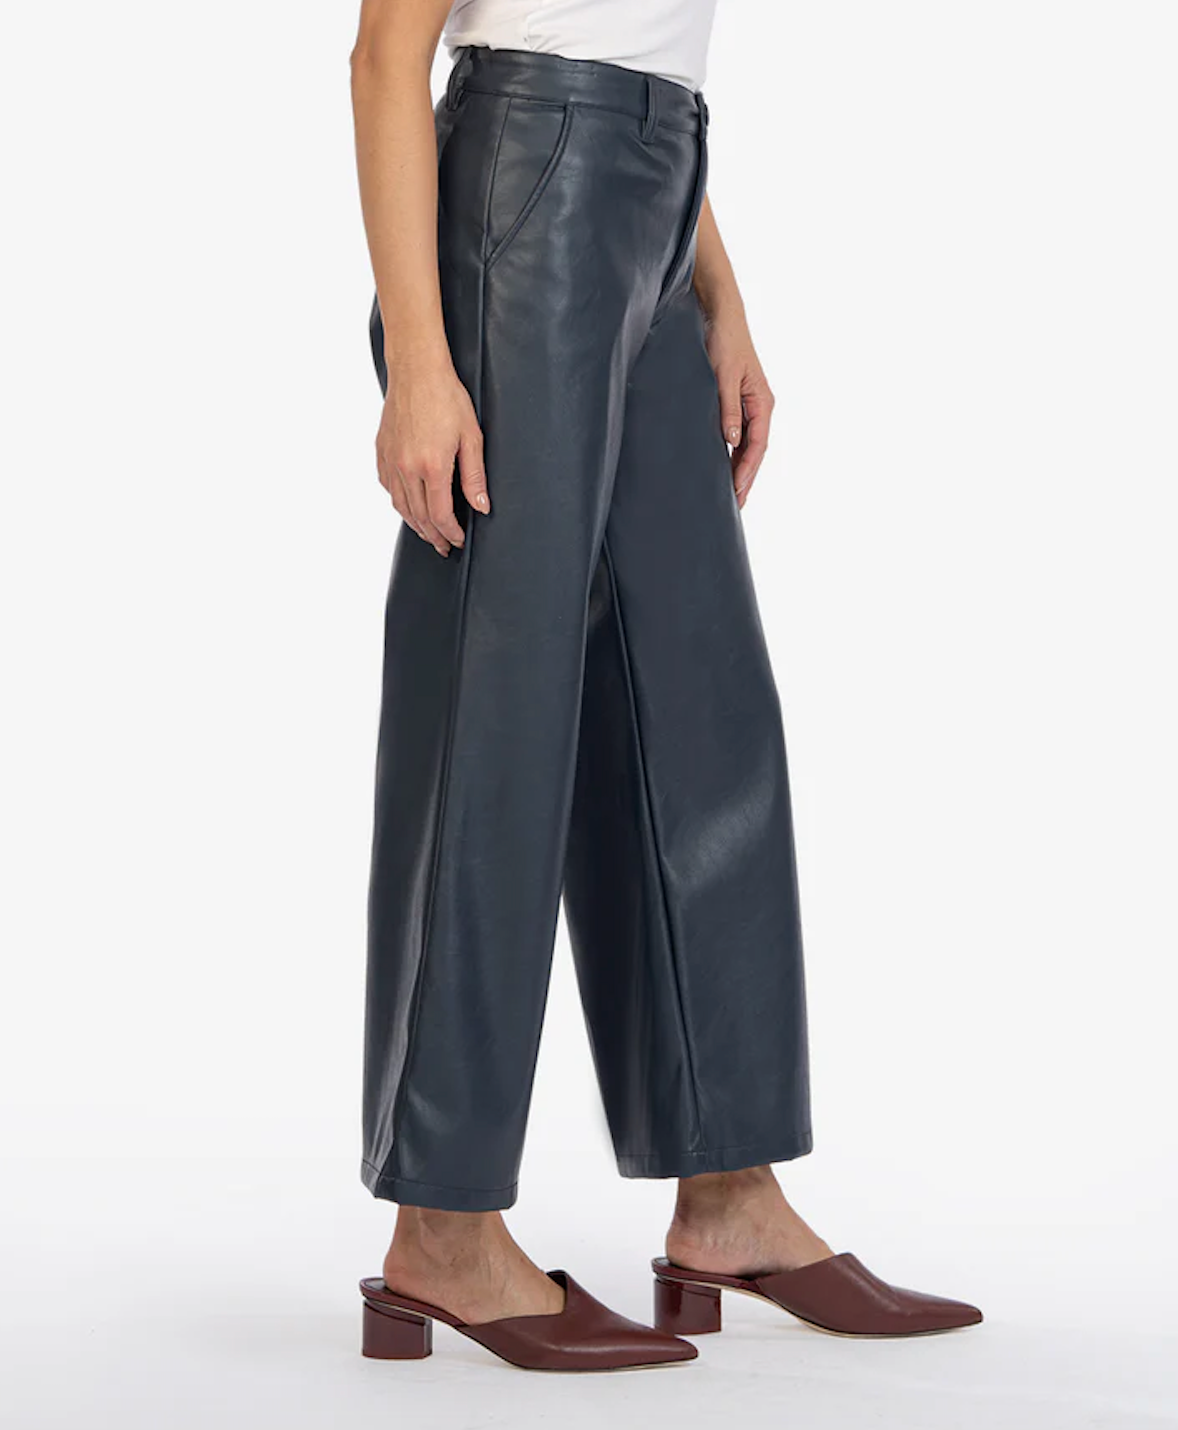 KUT FROM THE KLOTH AUBRIELLE HIGH RISE WIDE LEG COATED TROUSER IN NAVY